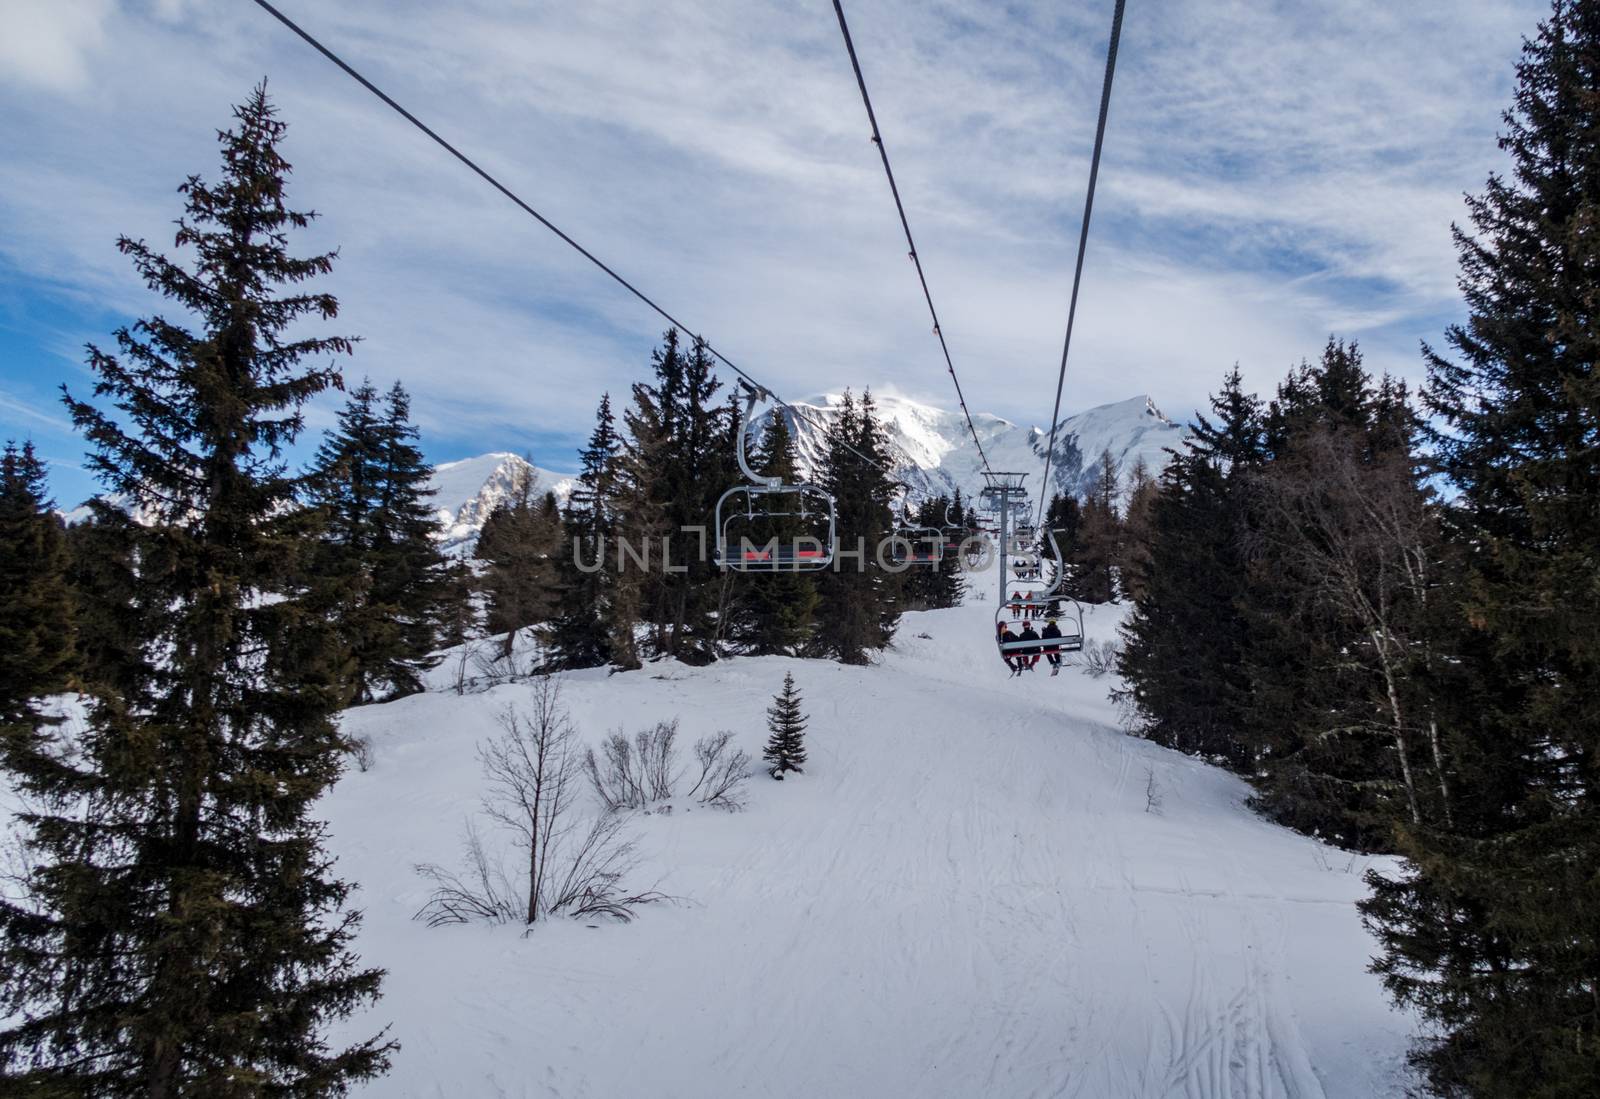 Ski chair lifts in action in Chamonix, France by magicbones